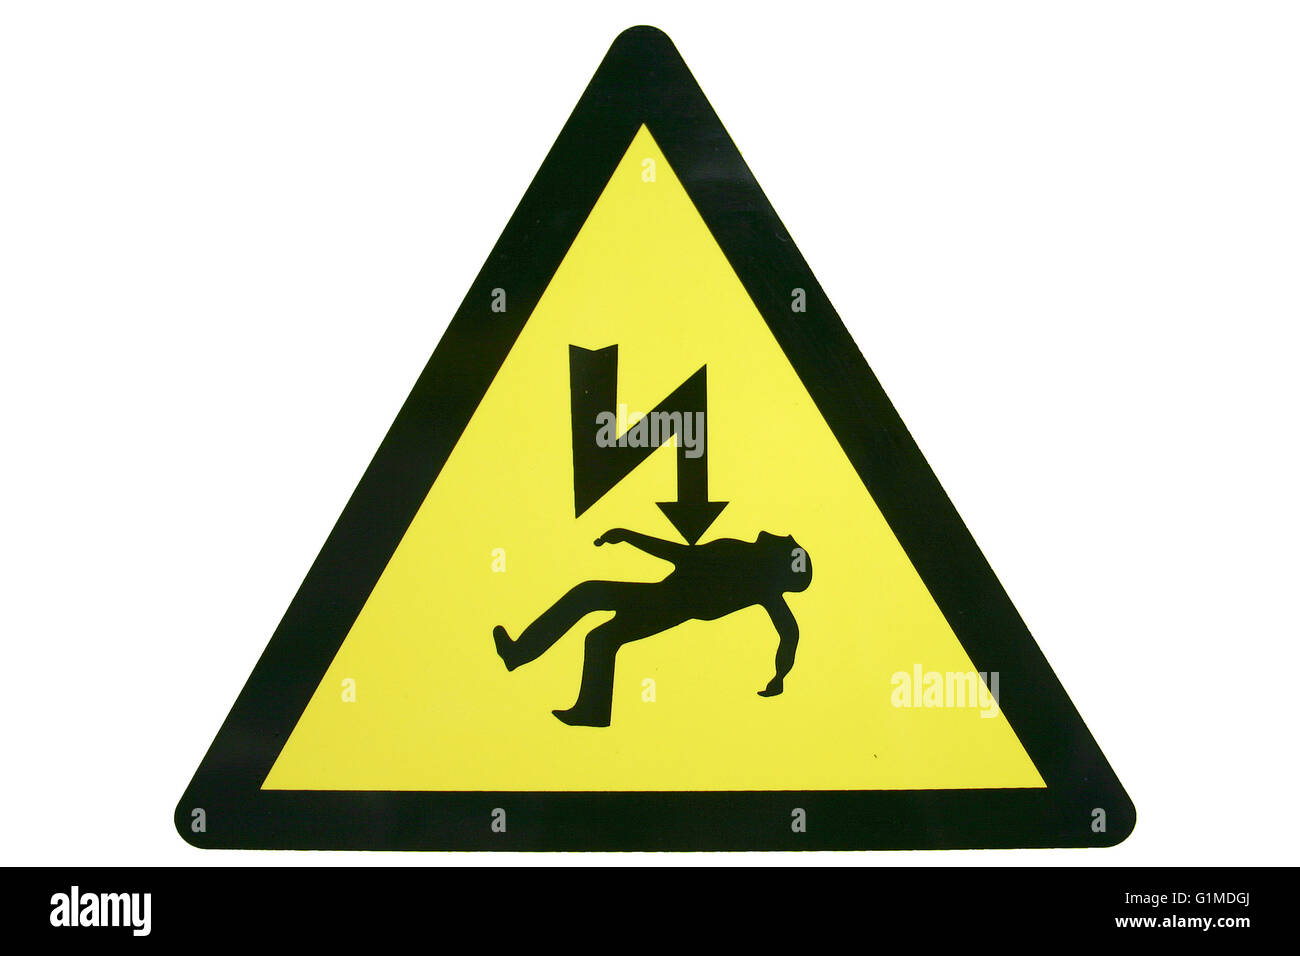 A triangular warning or information sign in yellow and black isolated on white depicting death by electric shock sign. Stock Photo